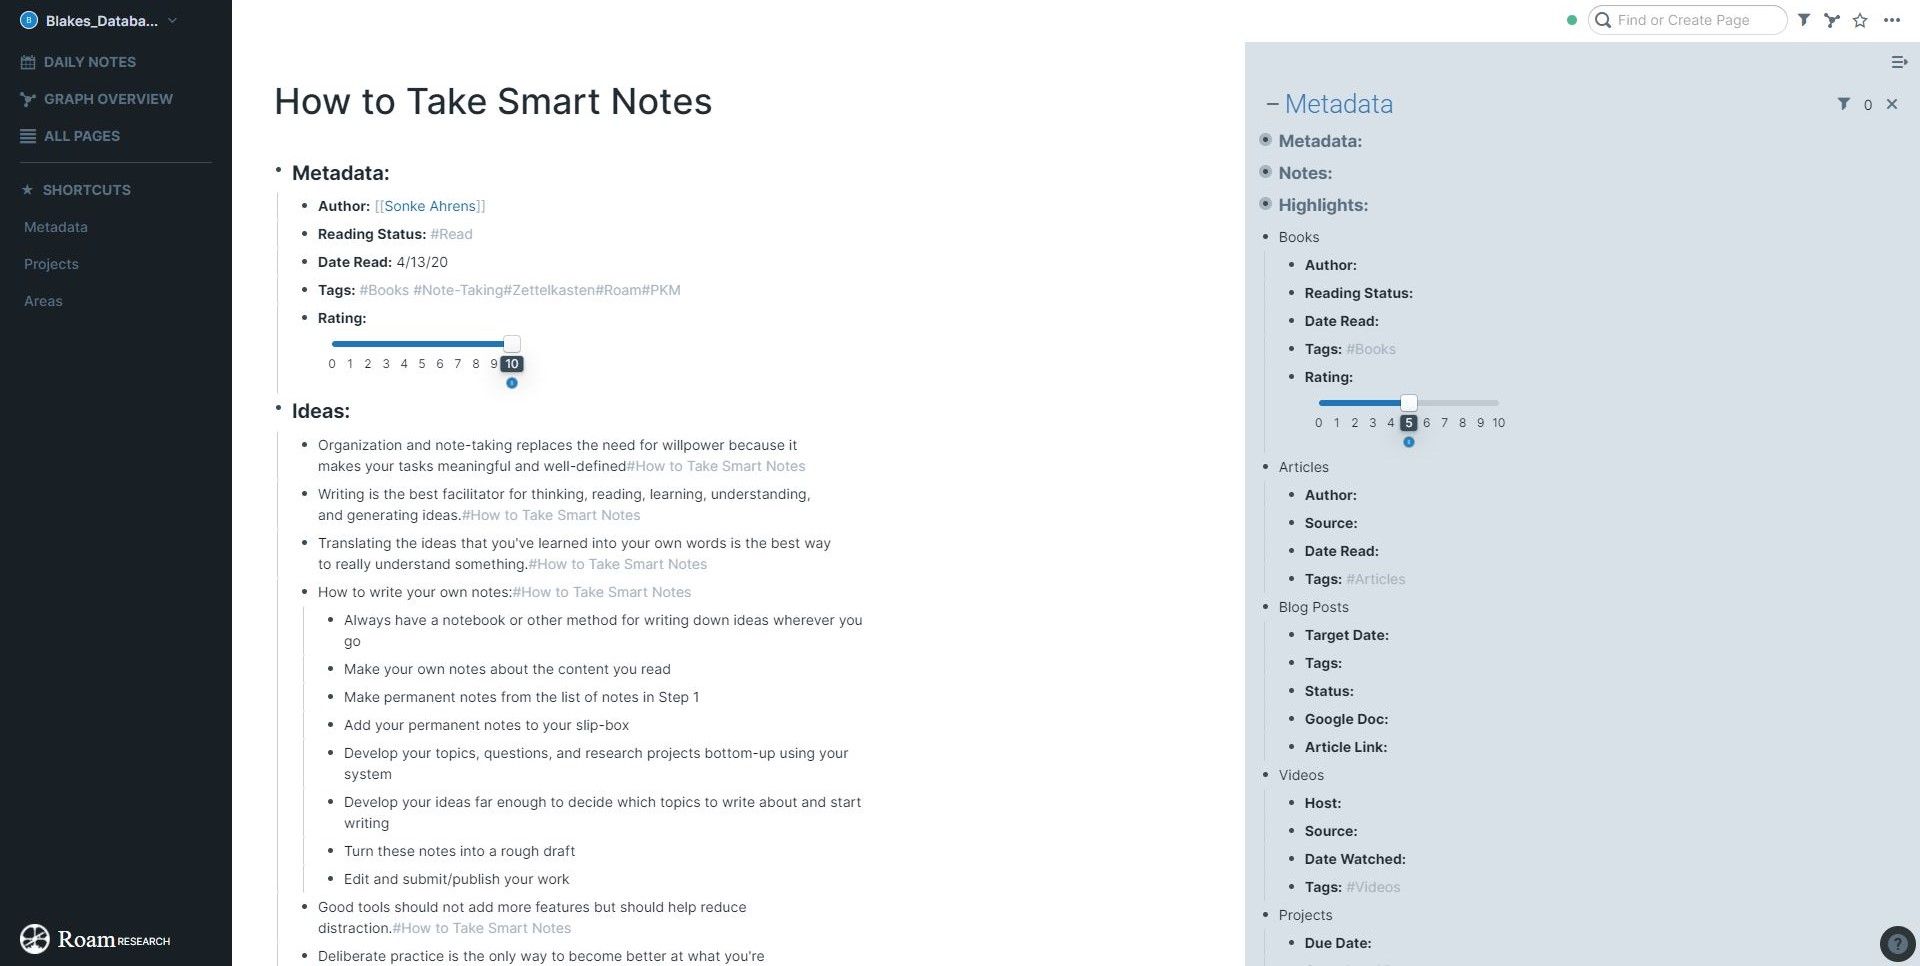 My page for How to Take Smart Notes by Sonke Ahrens.